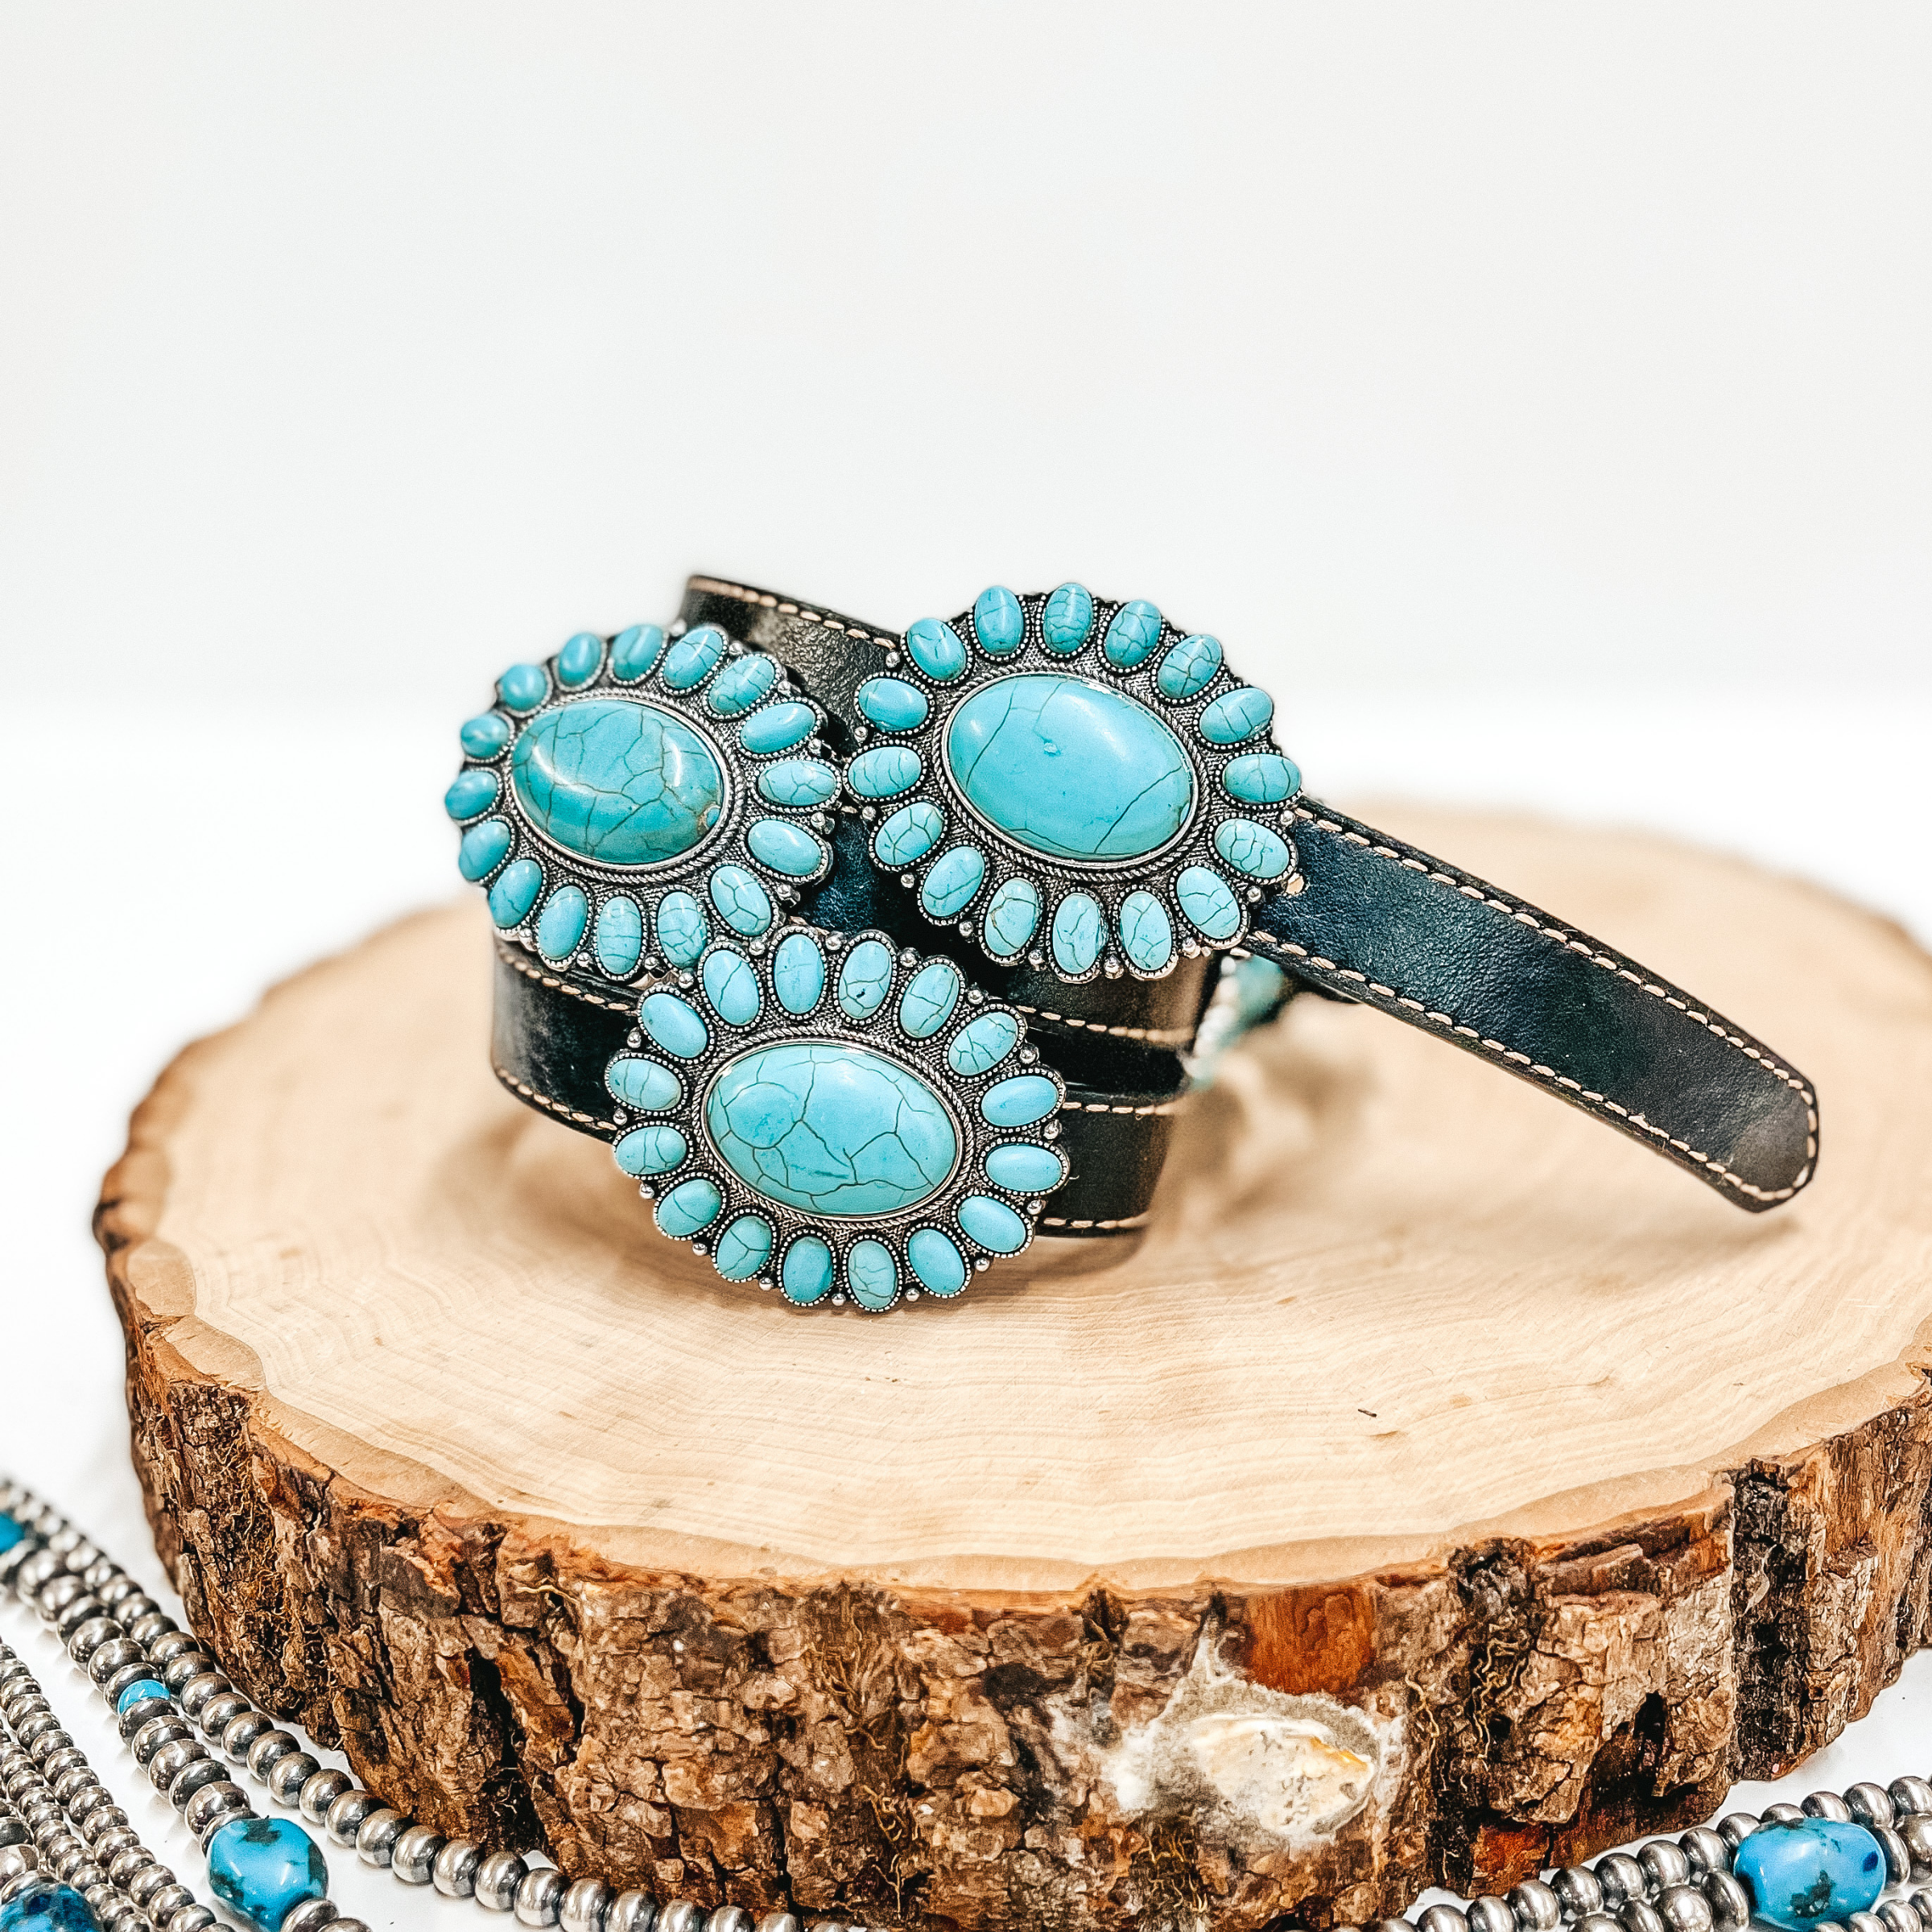 A black belt with faux turquoise cluster conchos pictured on wooden display with Navajo pearls on a white background.